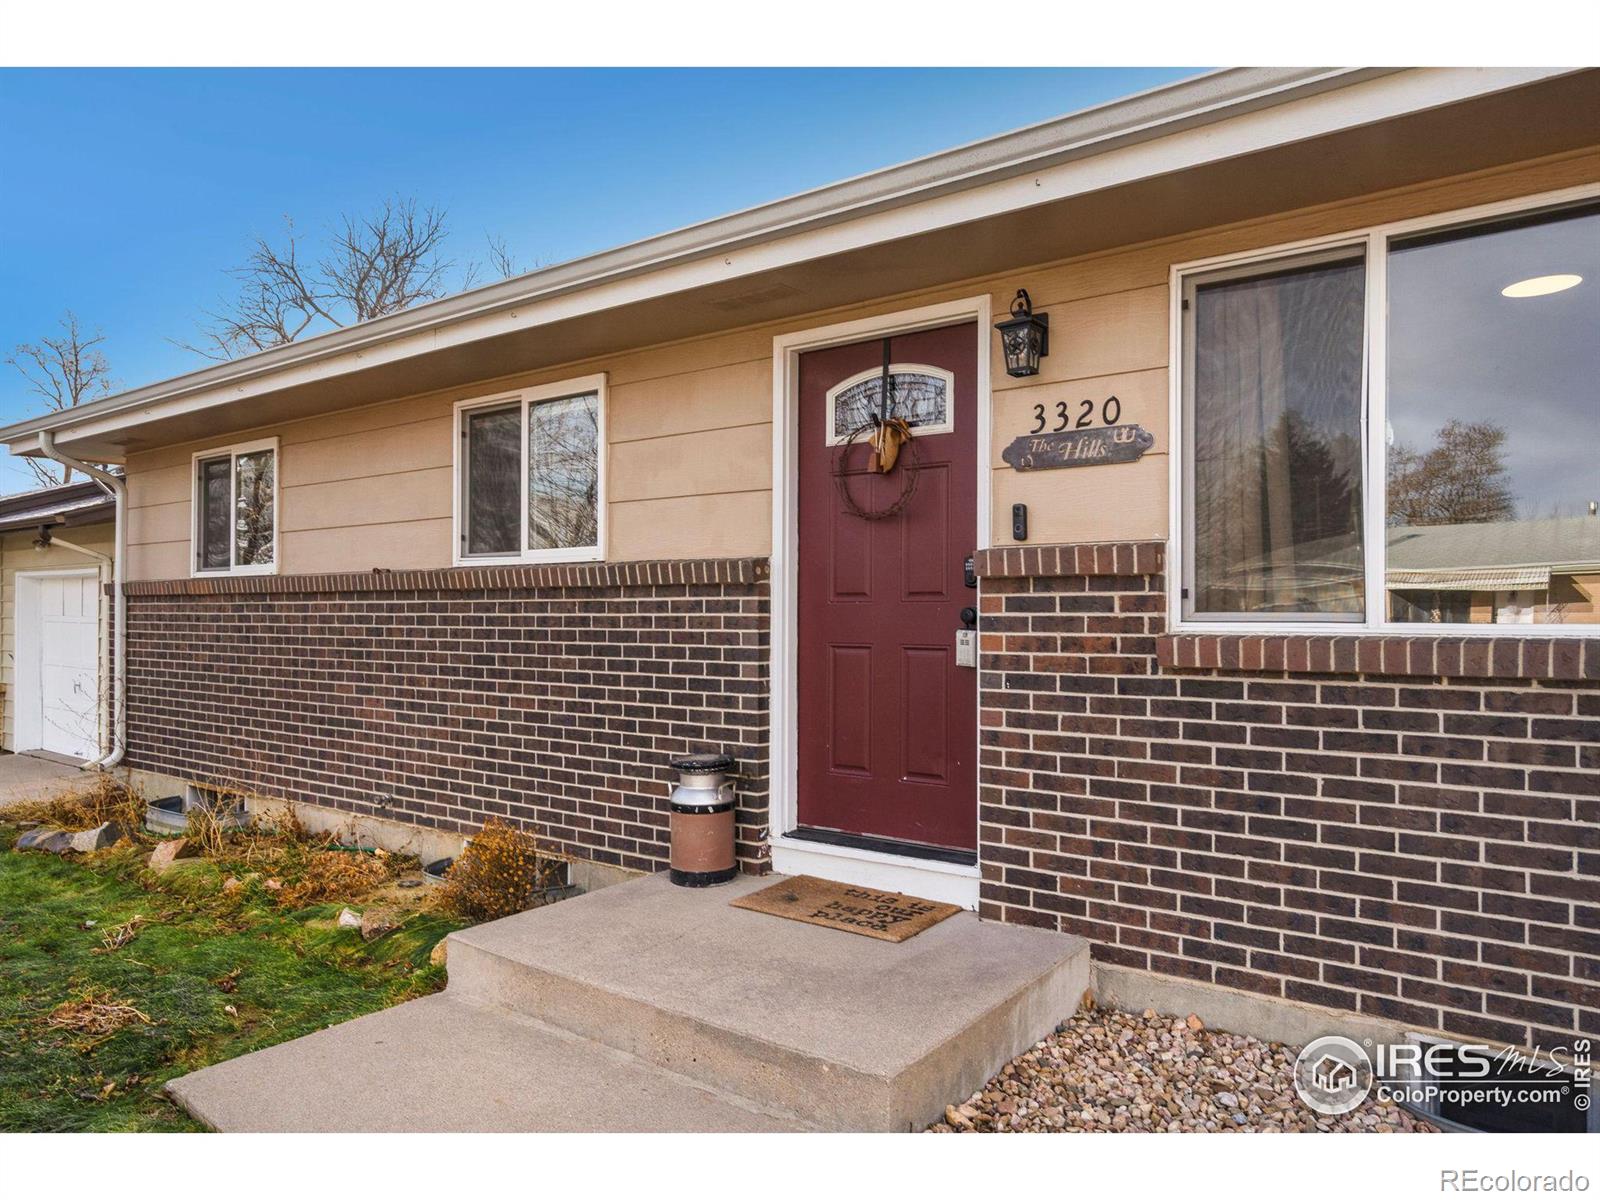 CMA Image for 3320 w 5th st rd,Greeley, Colorado